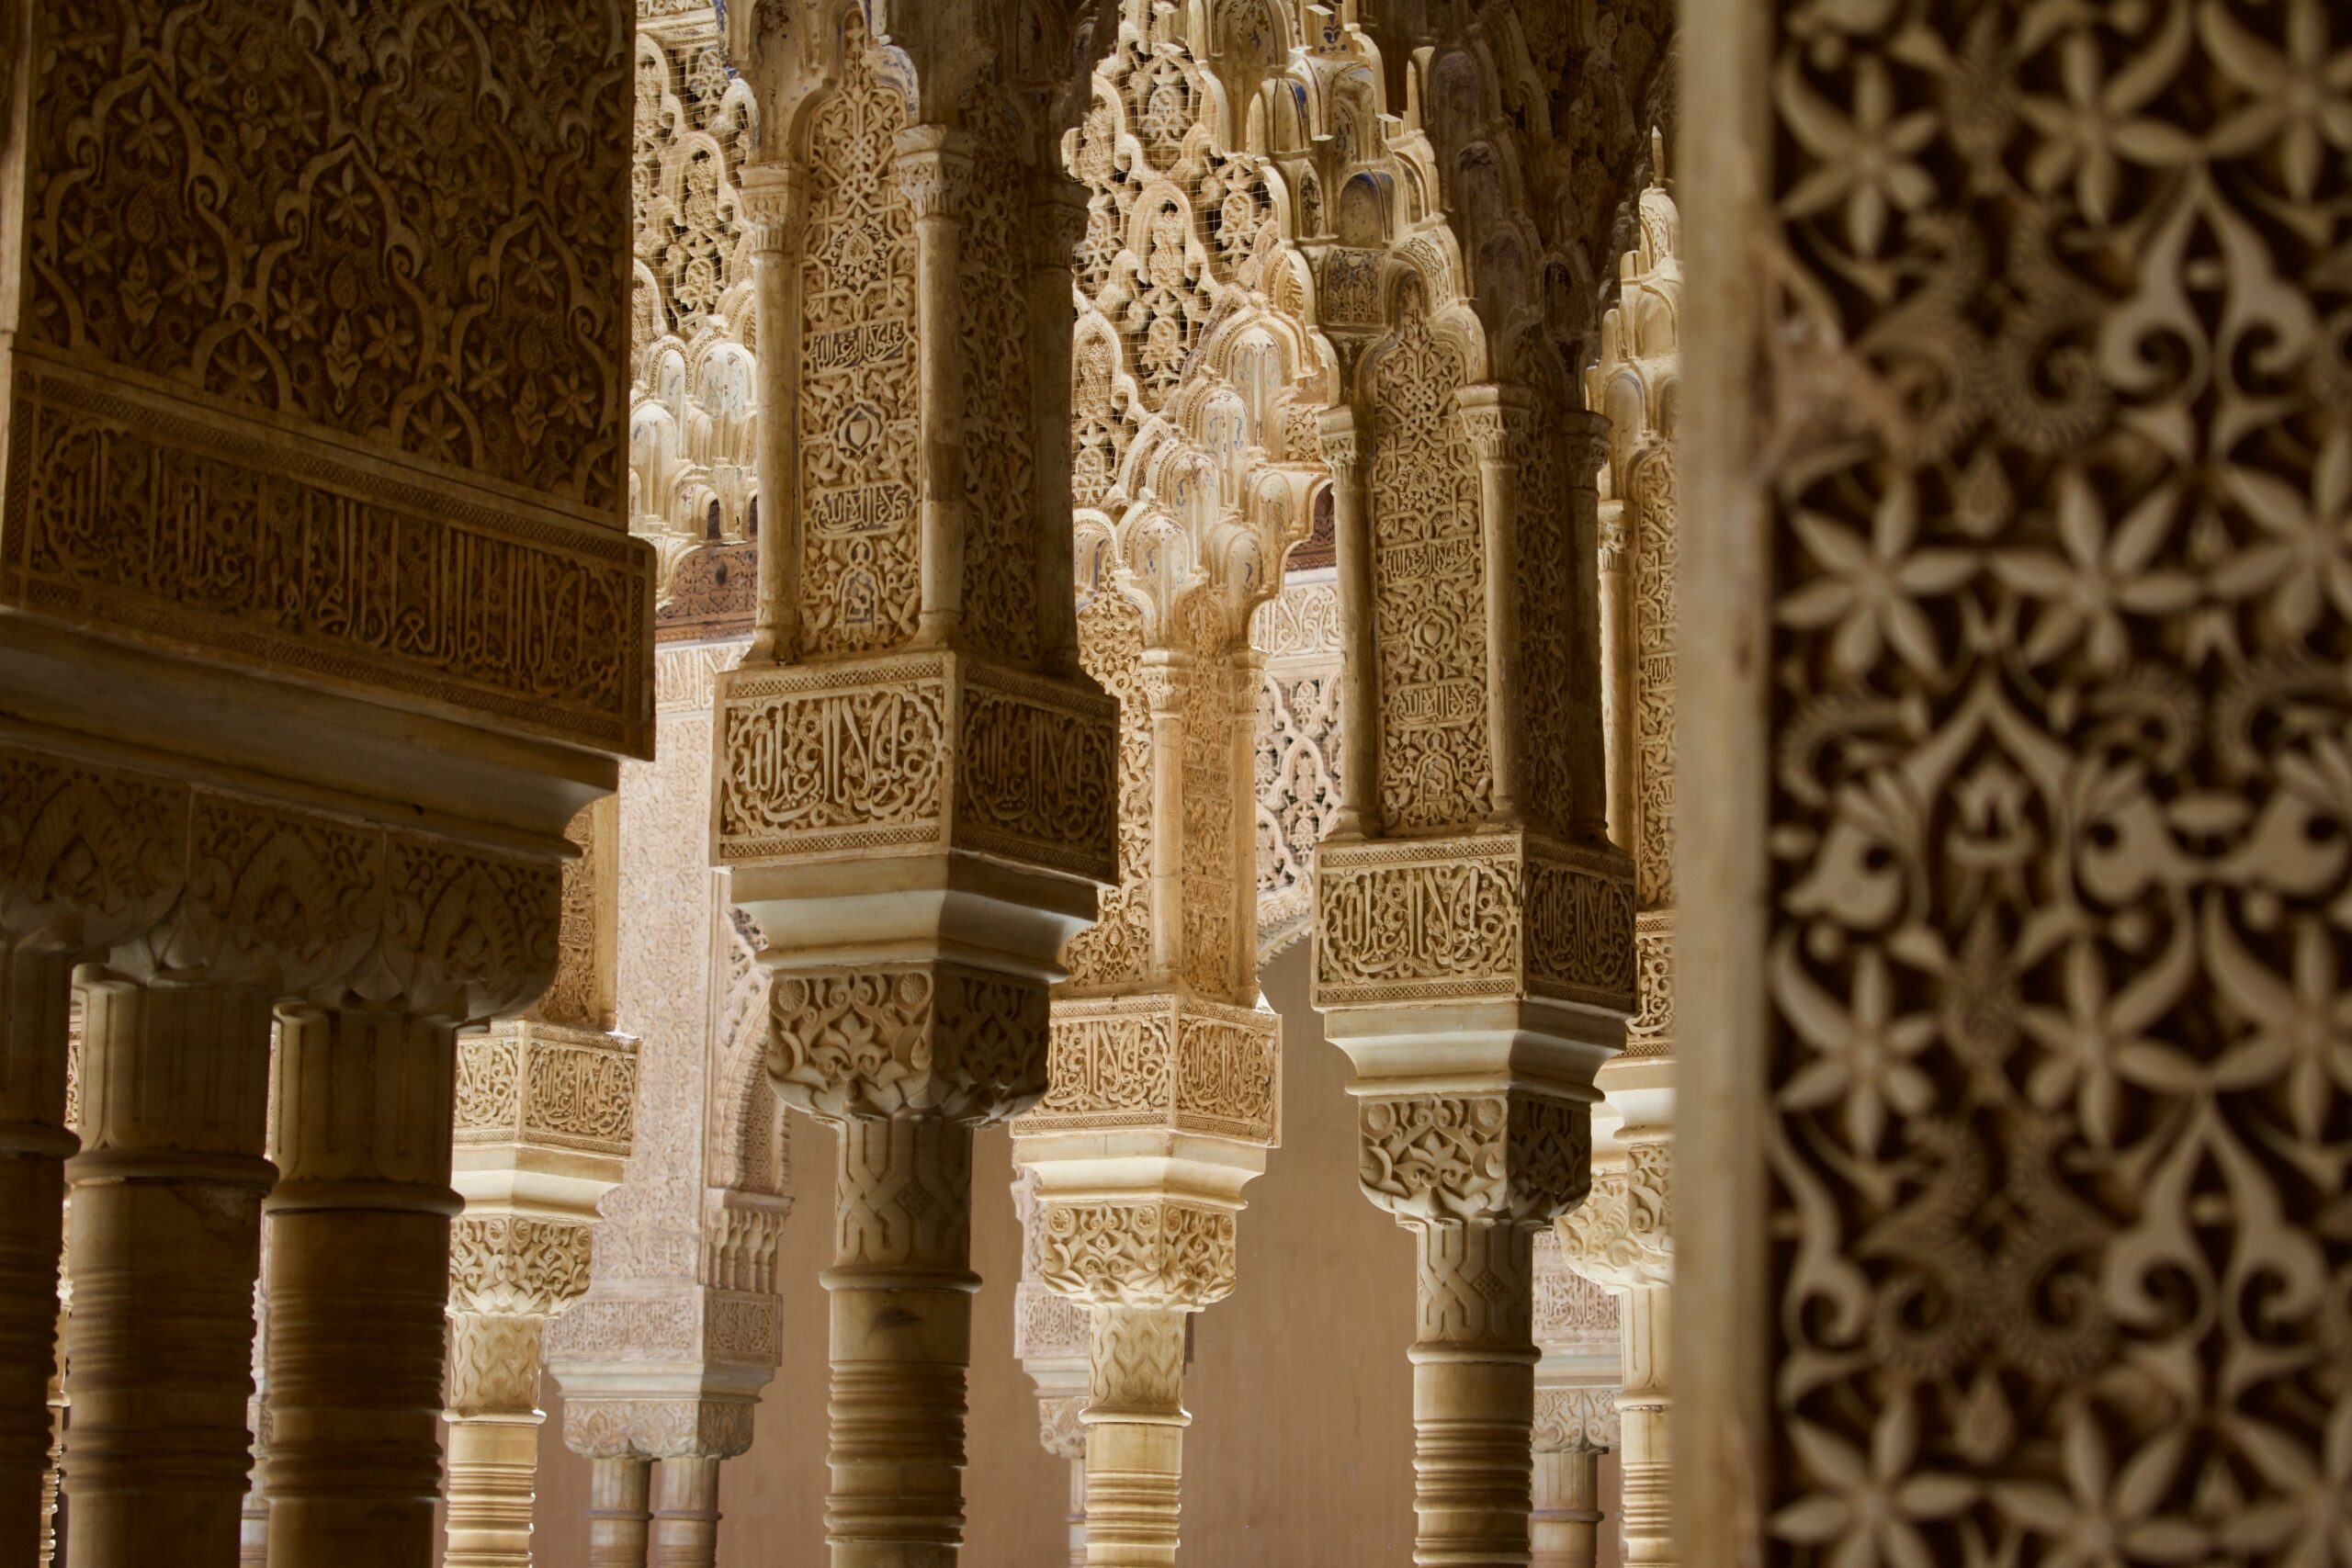 Intricate stonework on the arches in La Alhambra 